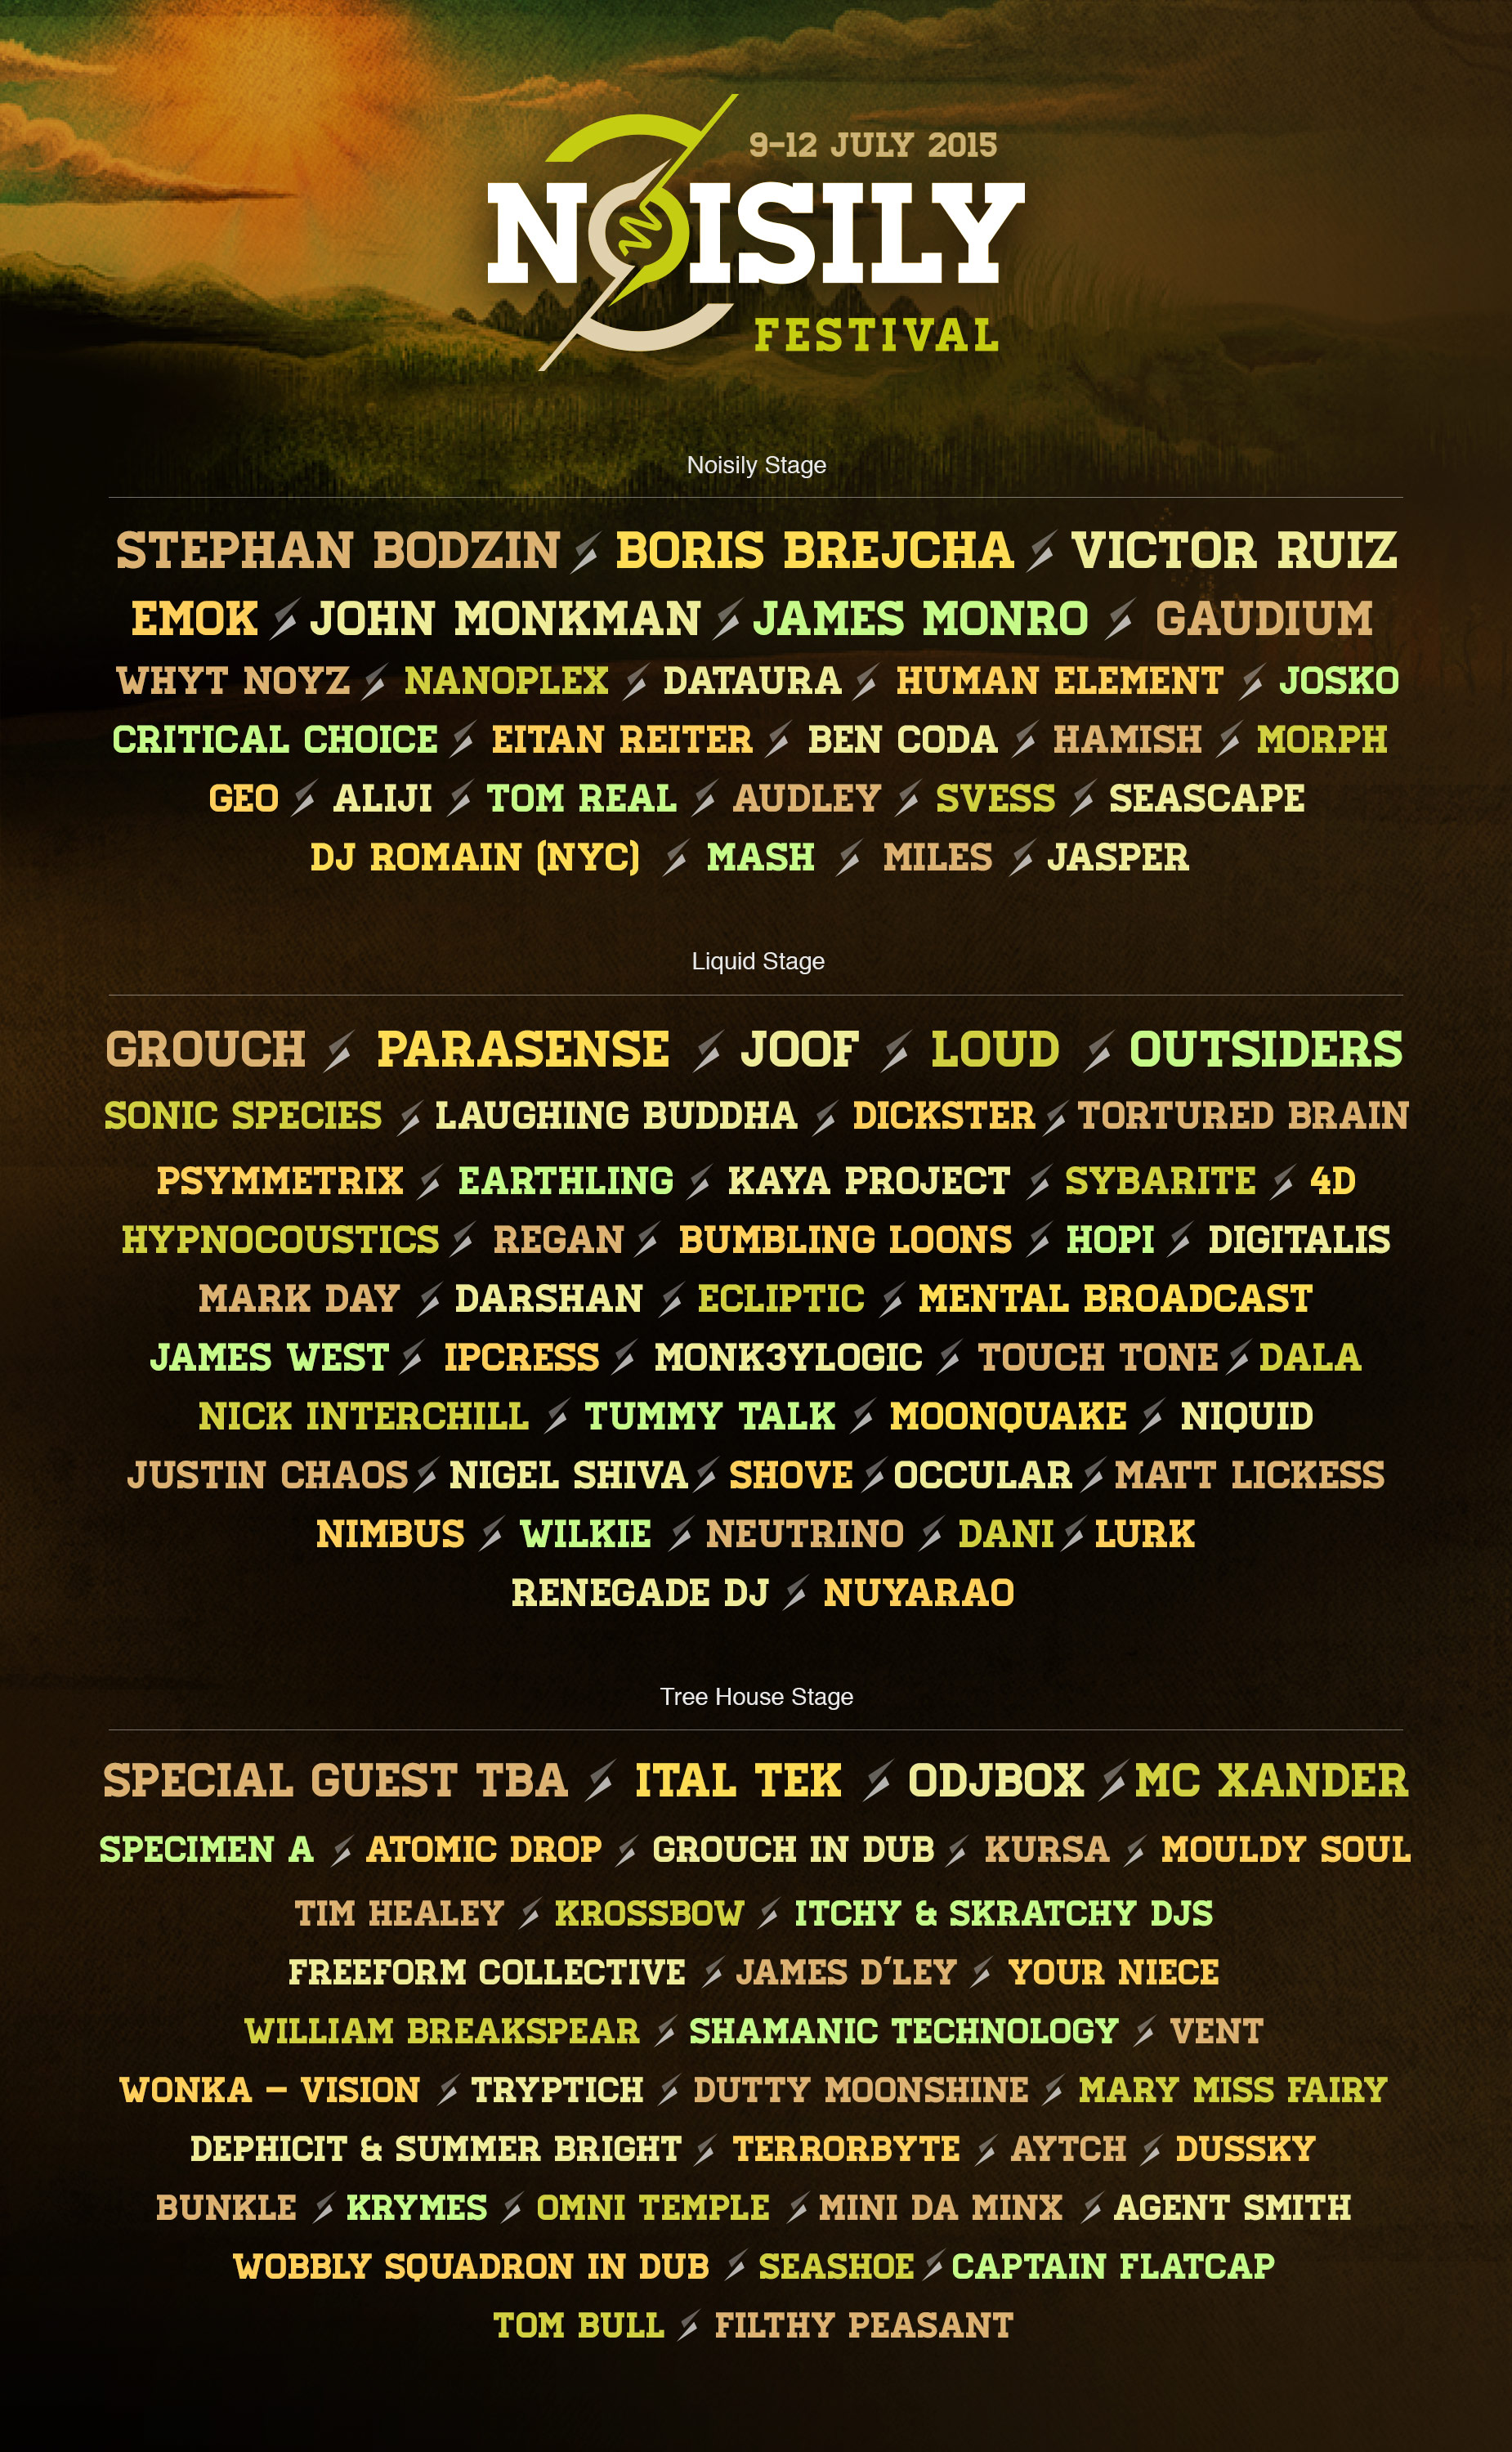 Noisily 2015 line-up poster